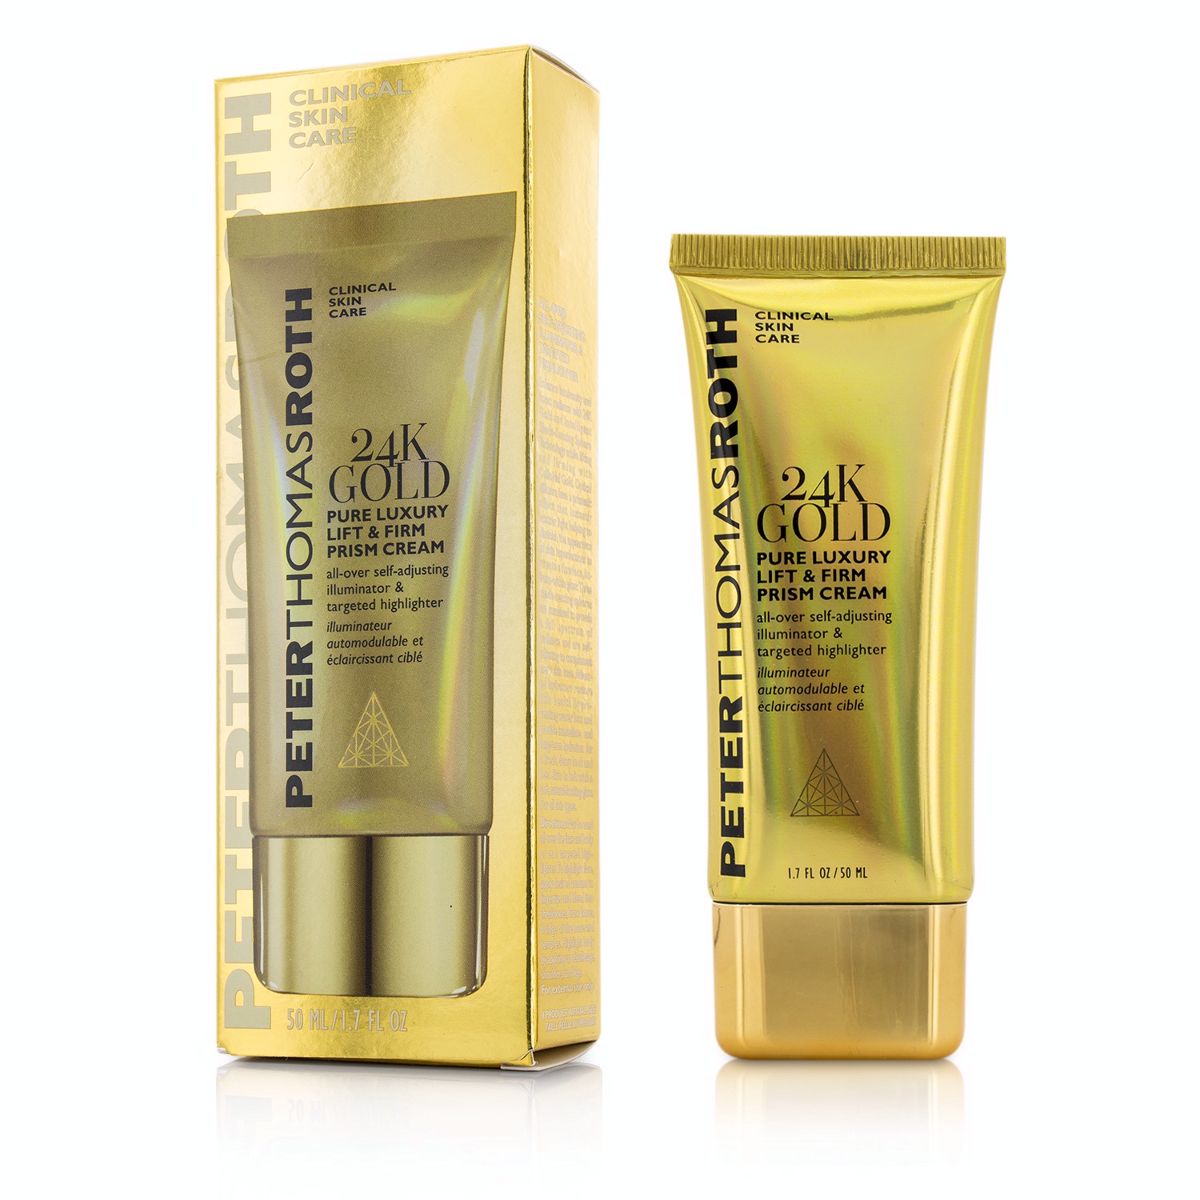 24K Gold Pure Luxury Lift  Firm Prism Cream Peter Thomas Roth Image